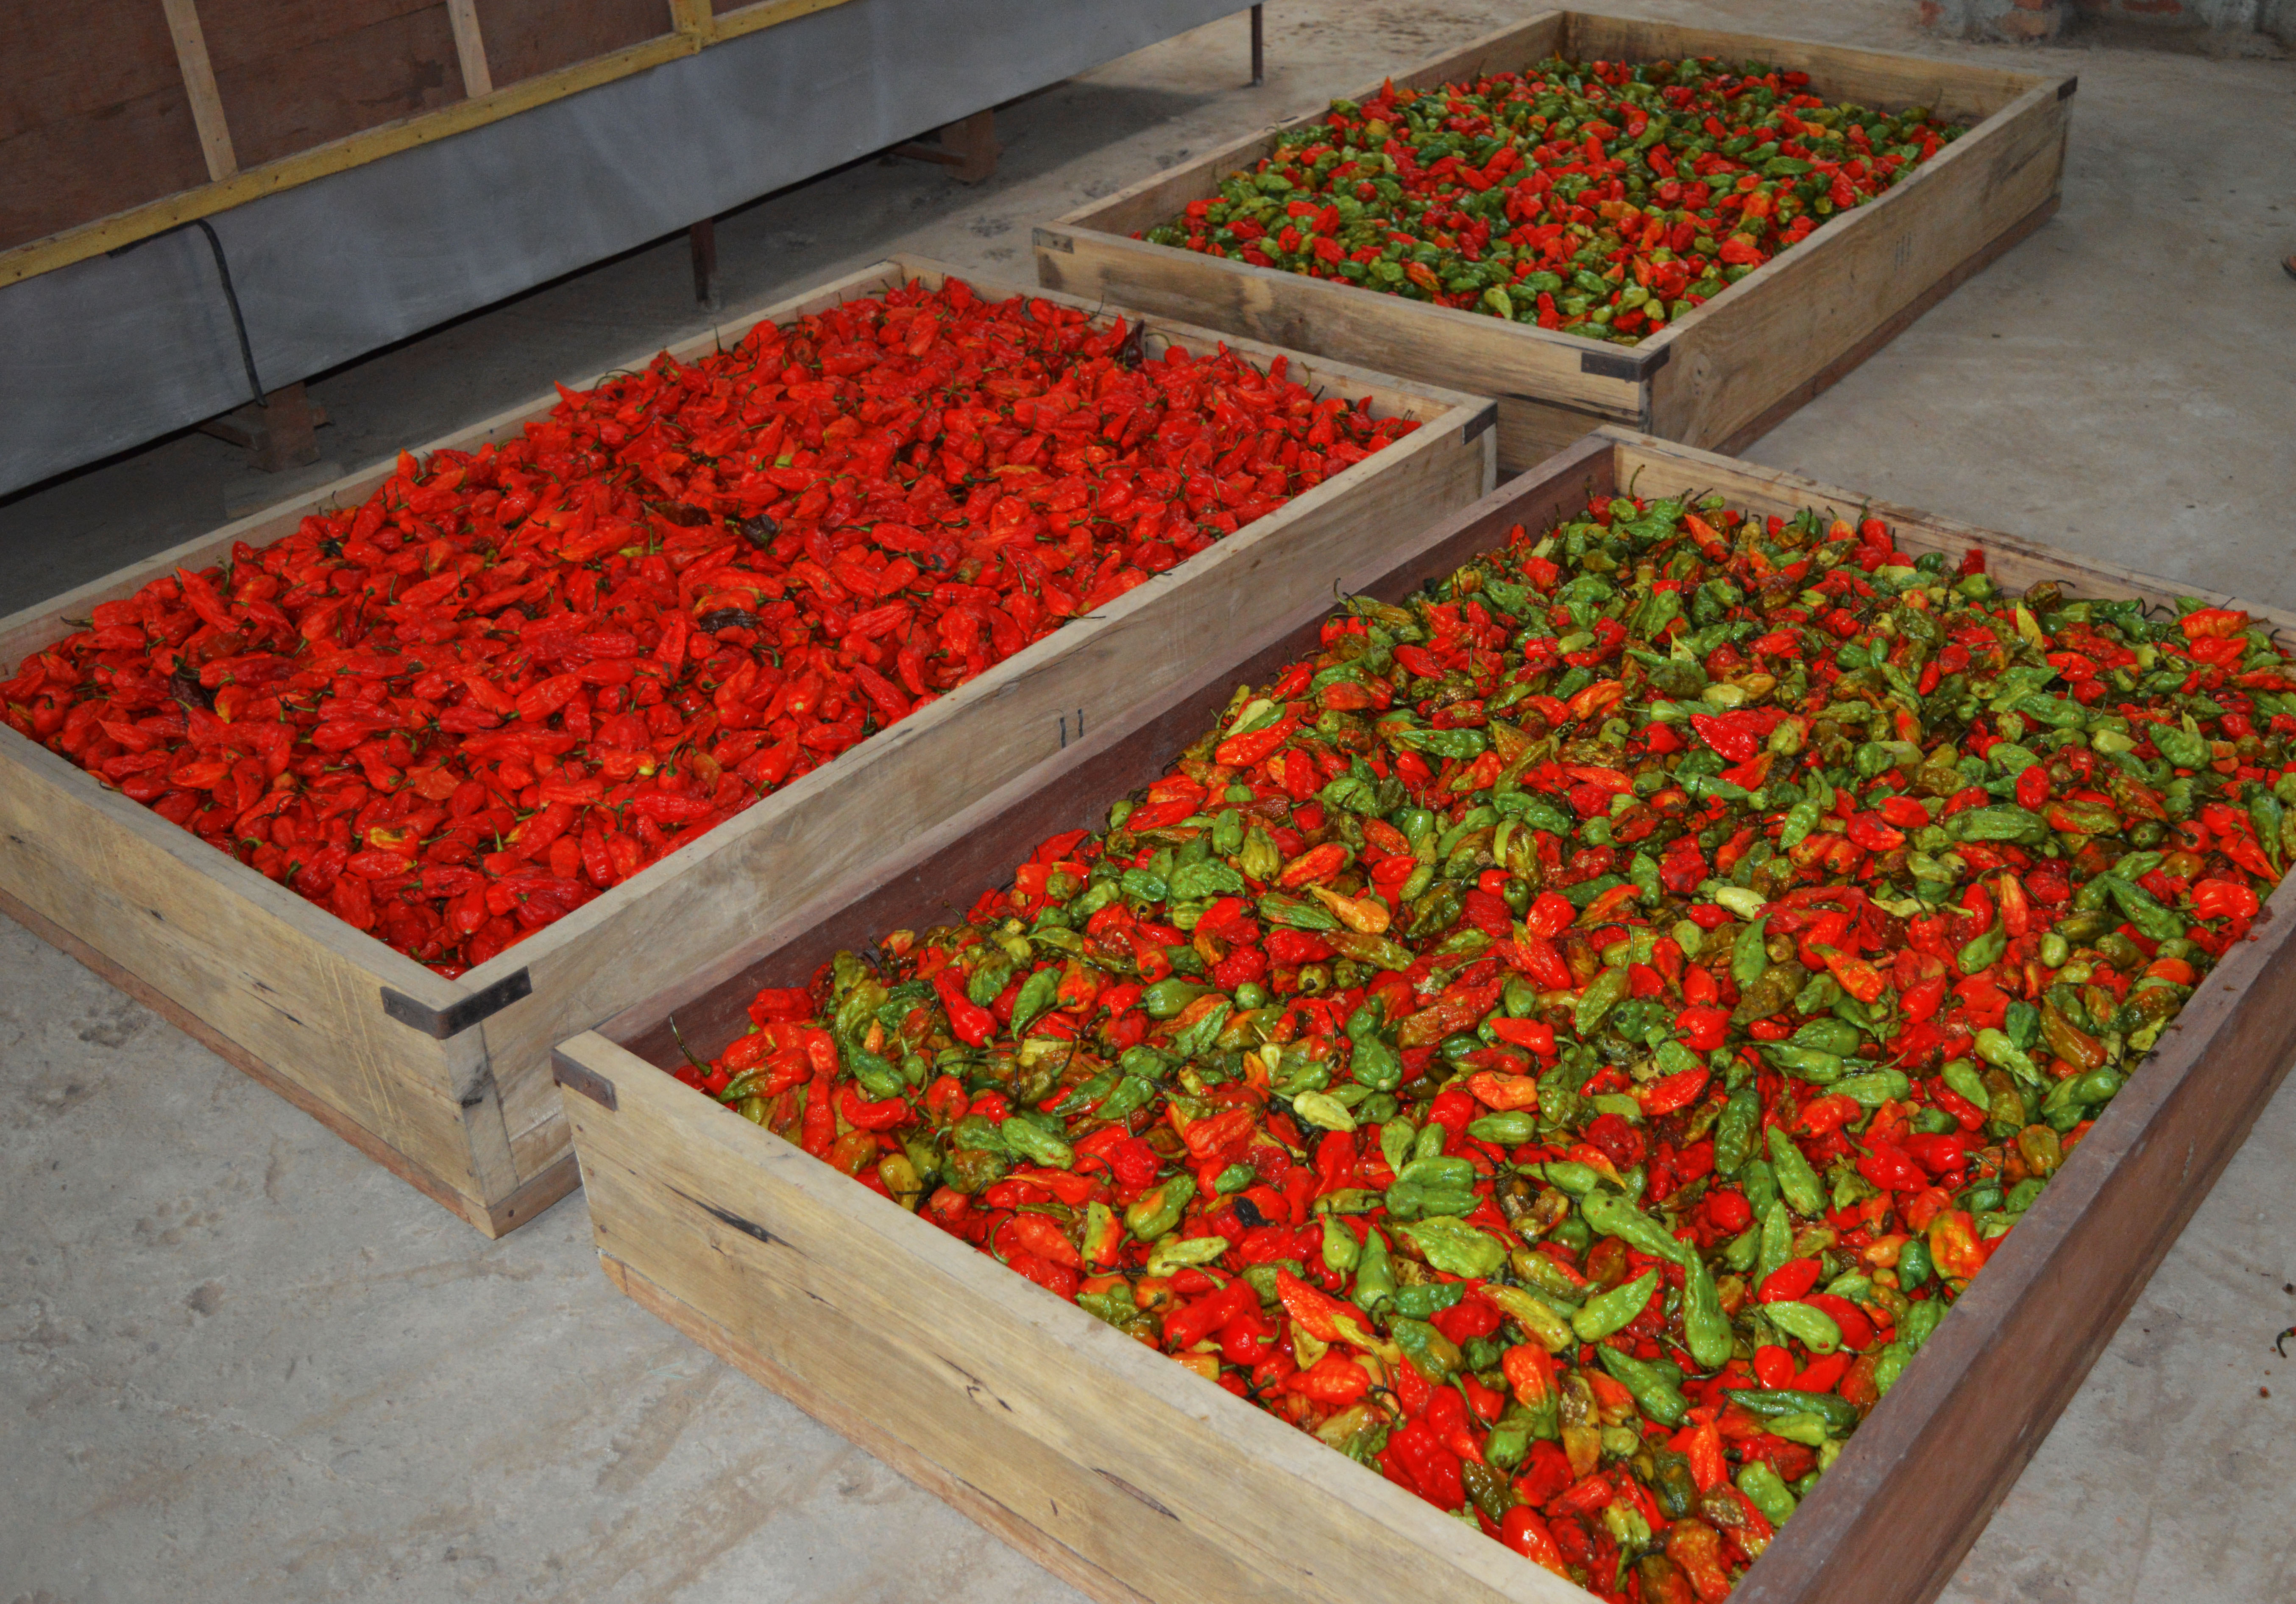 chillies-on-the-web-nagas-seperated-image.jpg